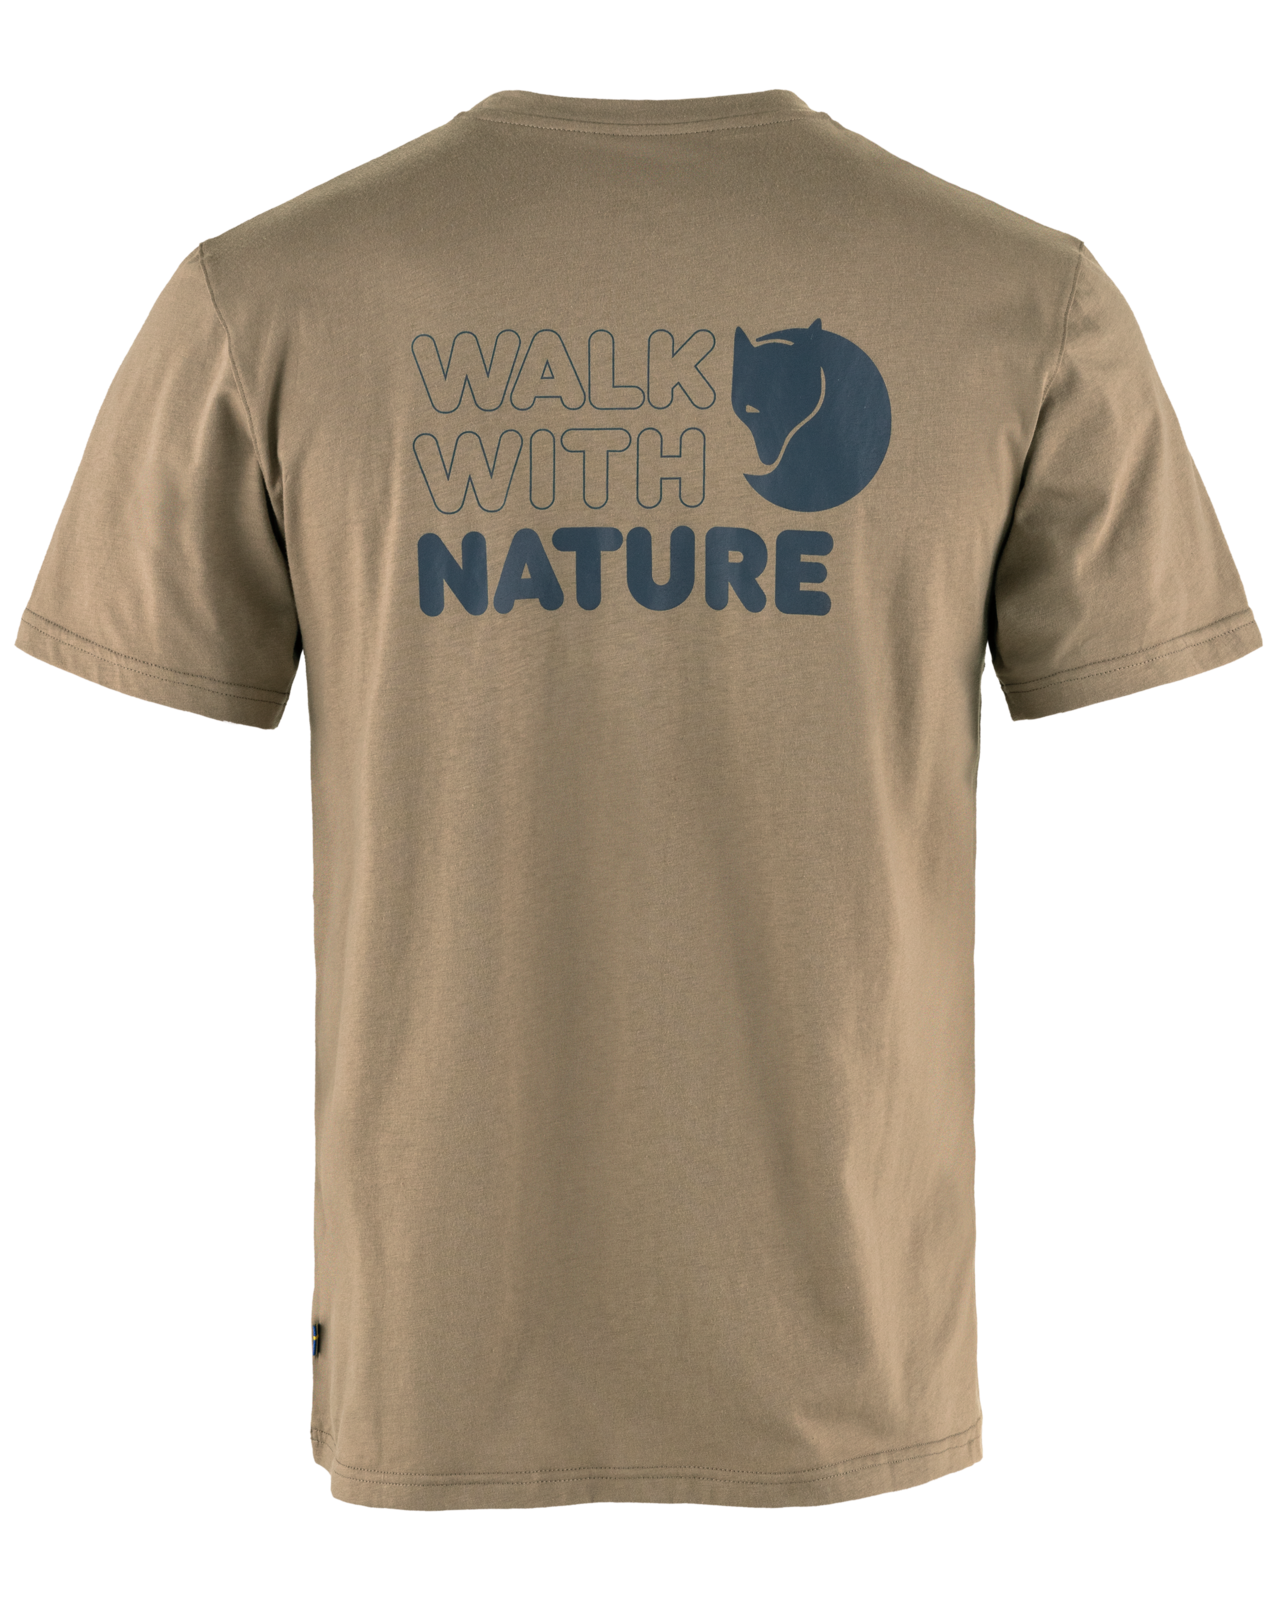 T-shirt Walk With Nature - Suede Brown - XL